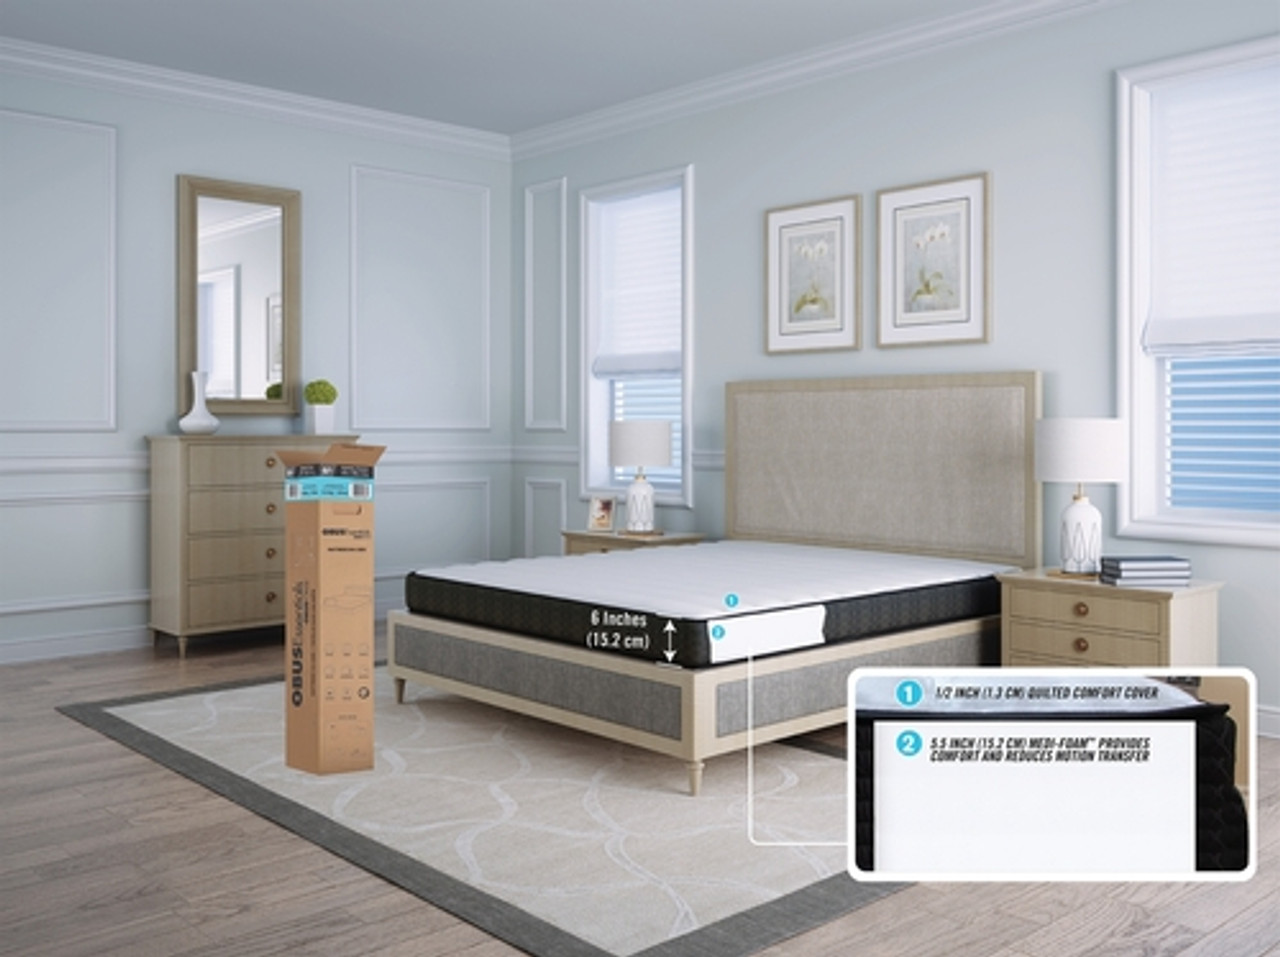 ObusForme MTE-FM6-QN ObusEssentials Comfort Series 6” MEDI-GEL cooled bed in the box Mattress, Queen